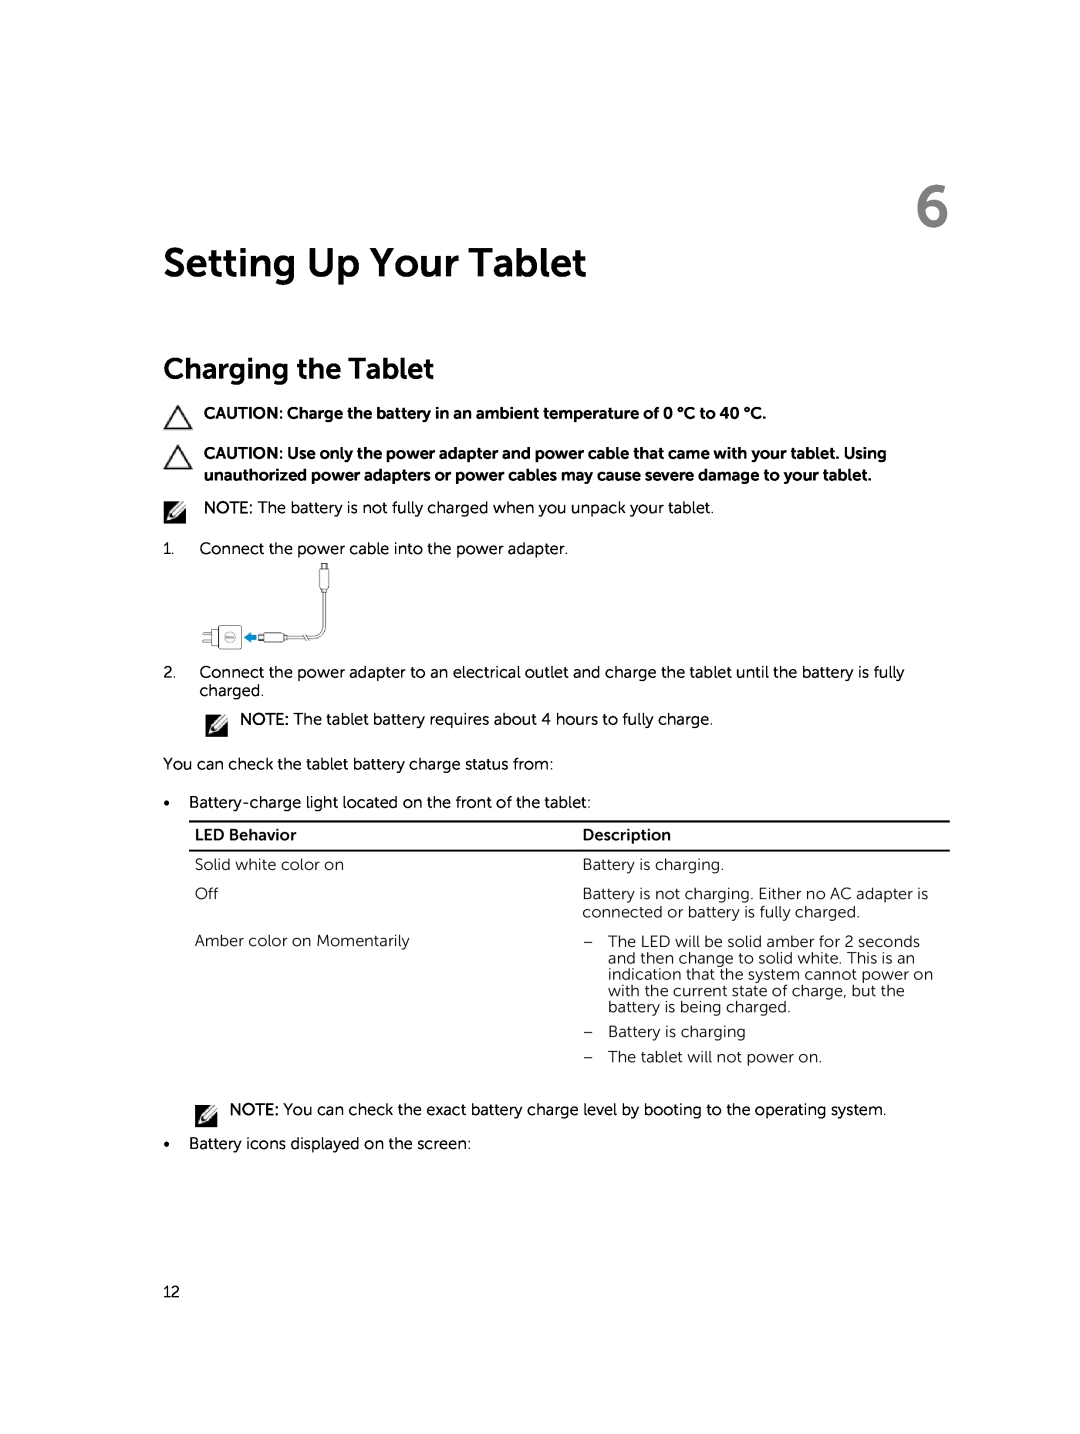 Dell 13-7350 manual Setting Up Your Tablet, Charging the Tablet 